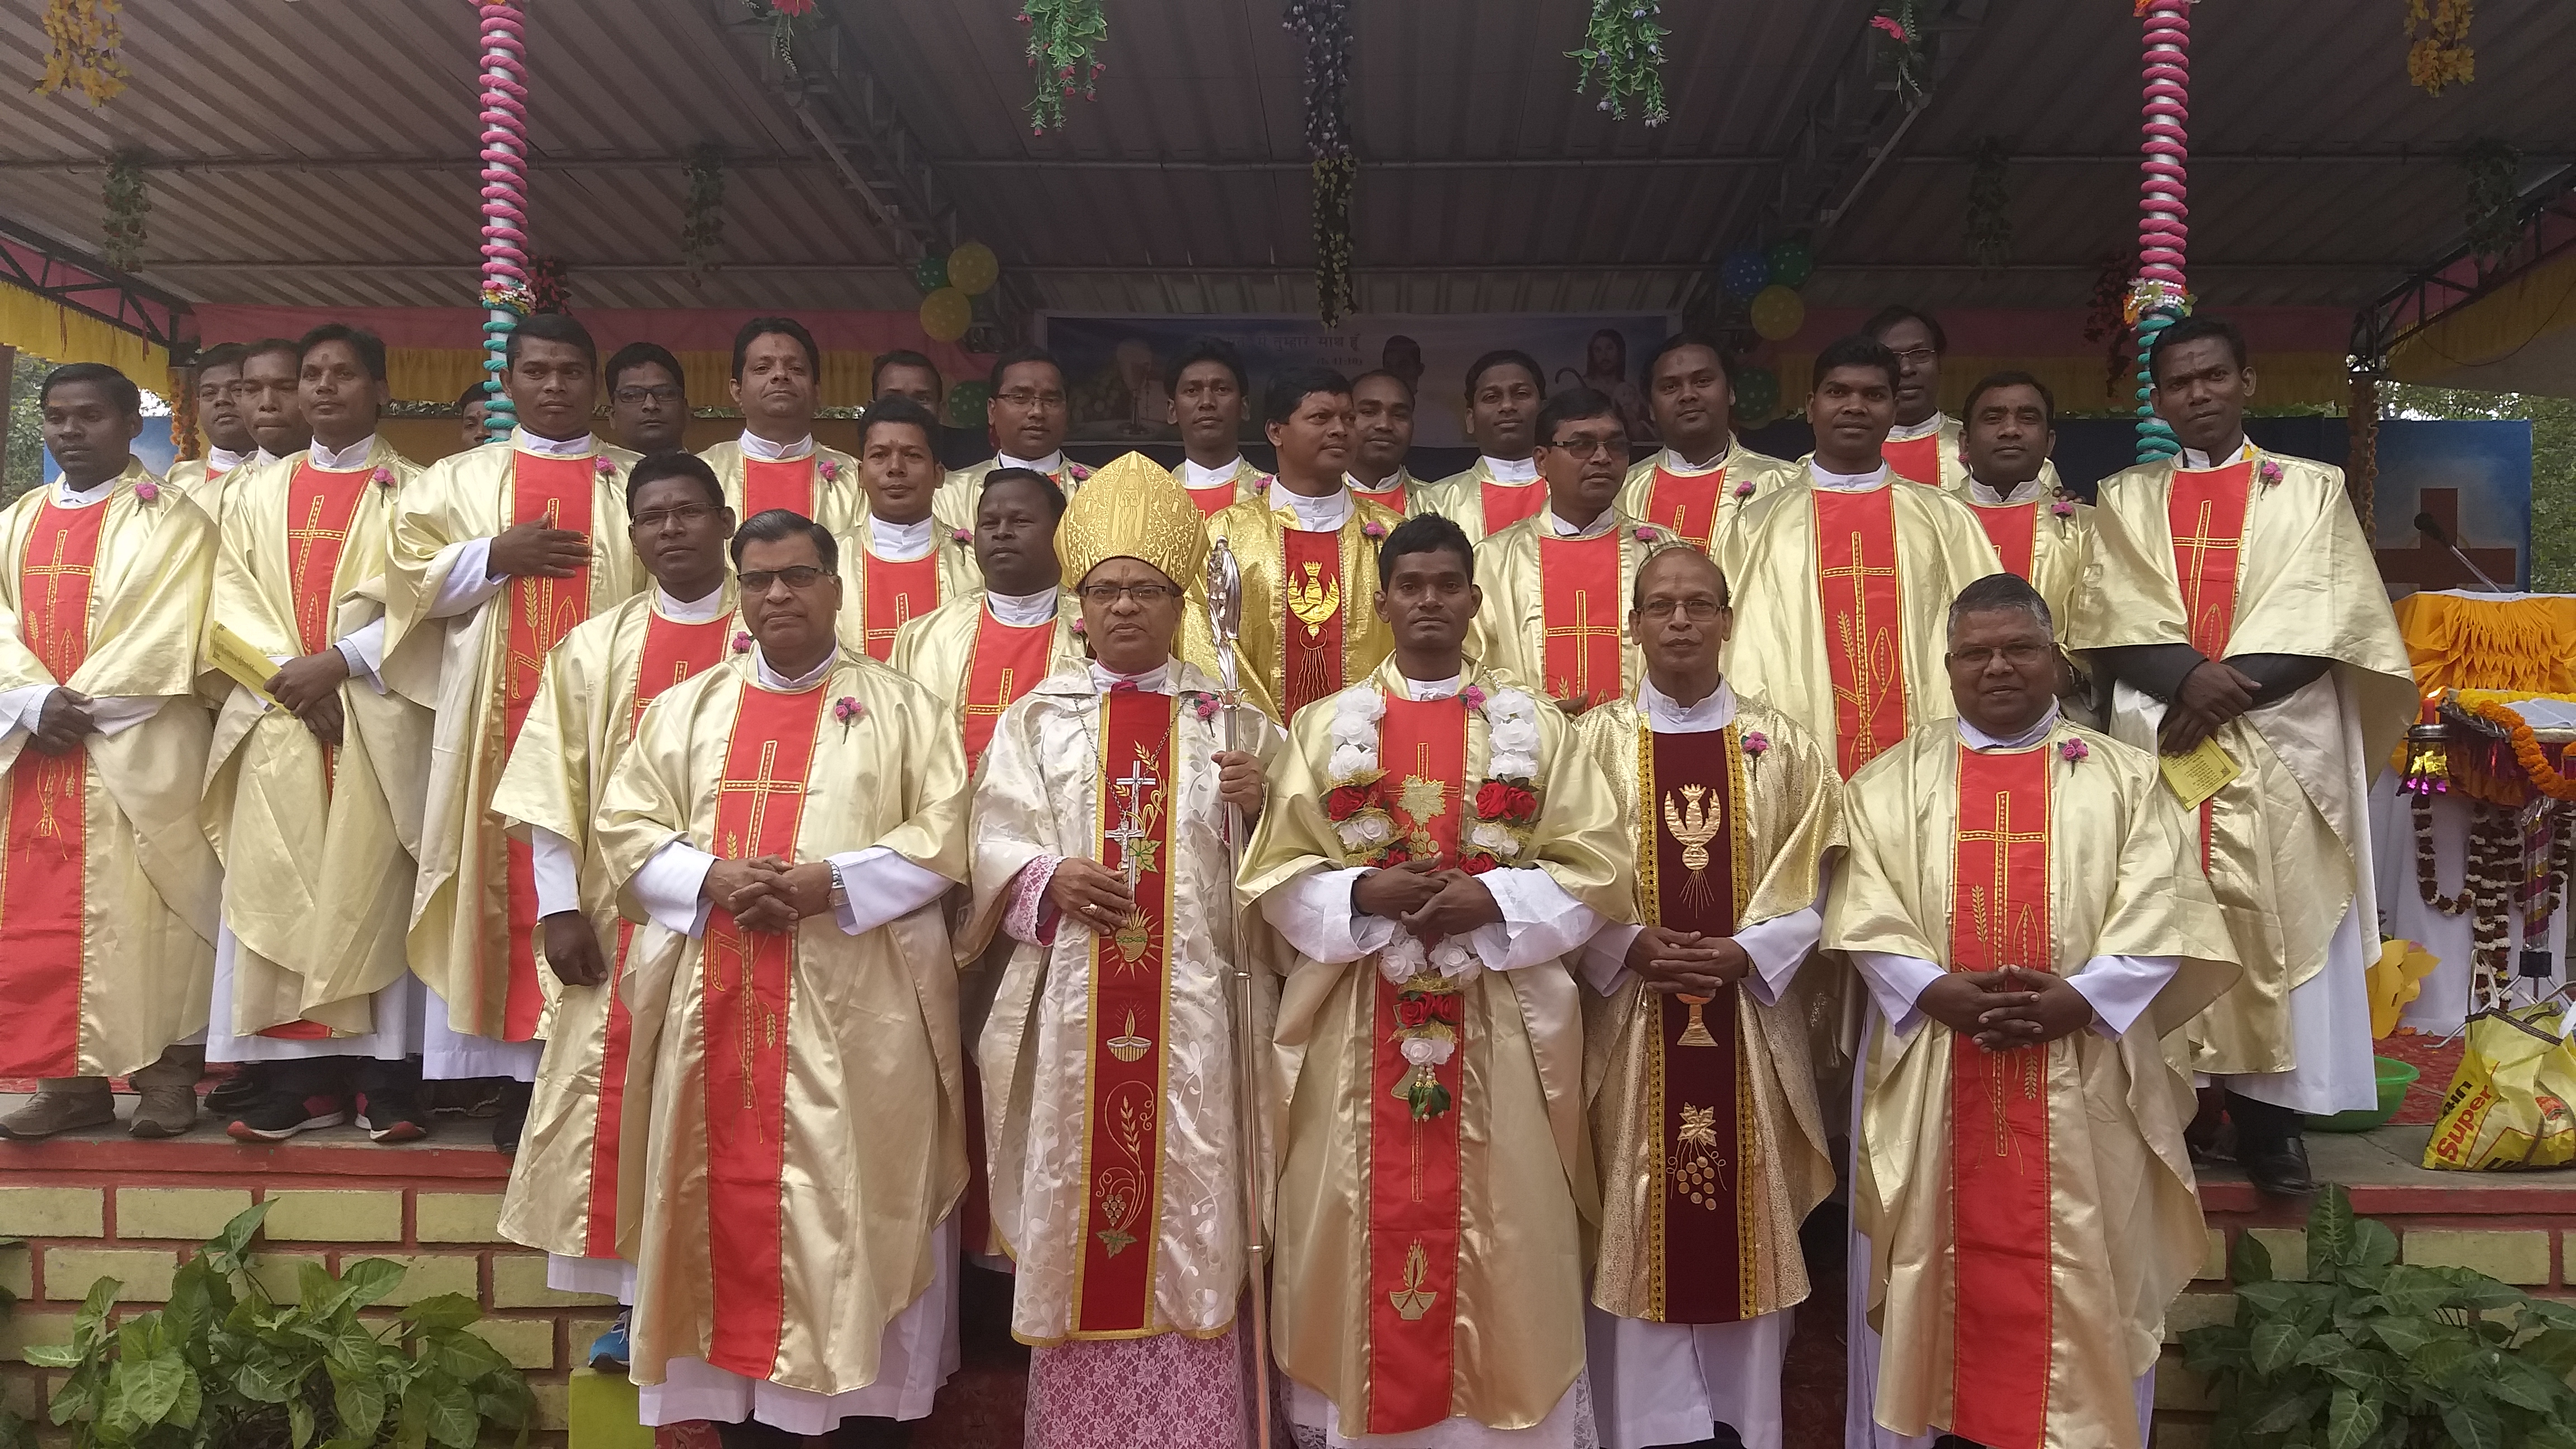 NEW PRIEST OF THE DIOCESE OF SAMBALPUR